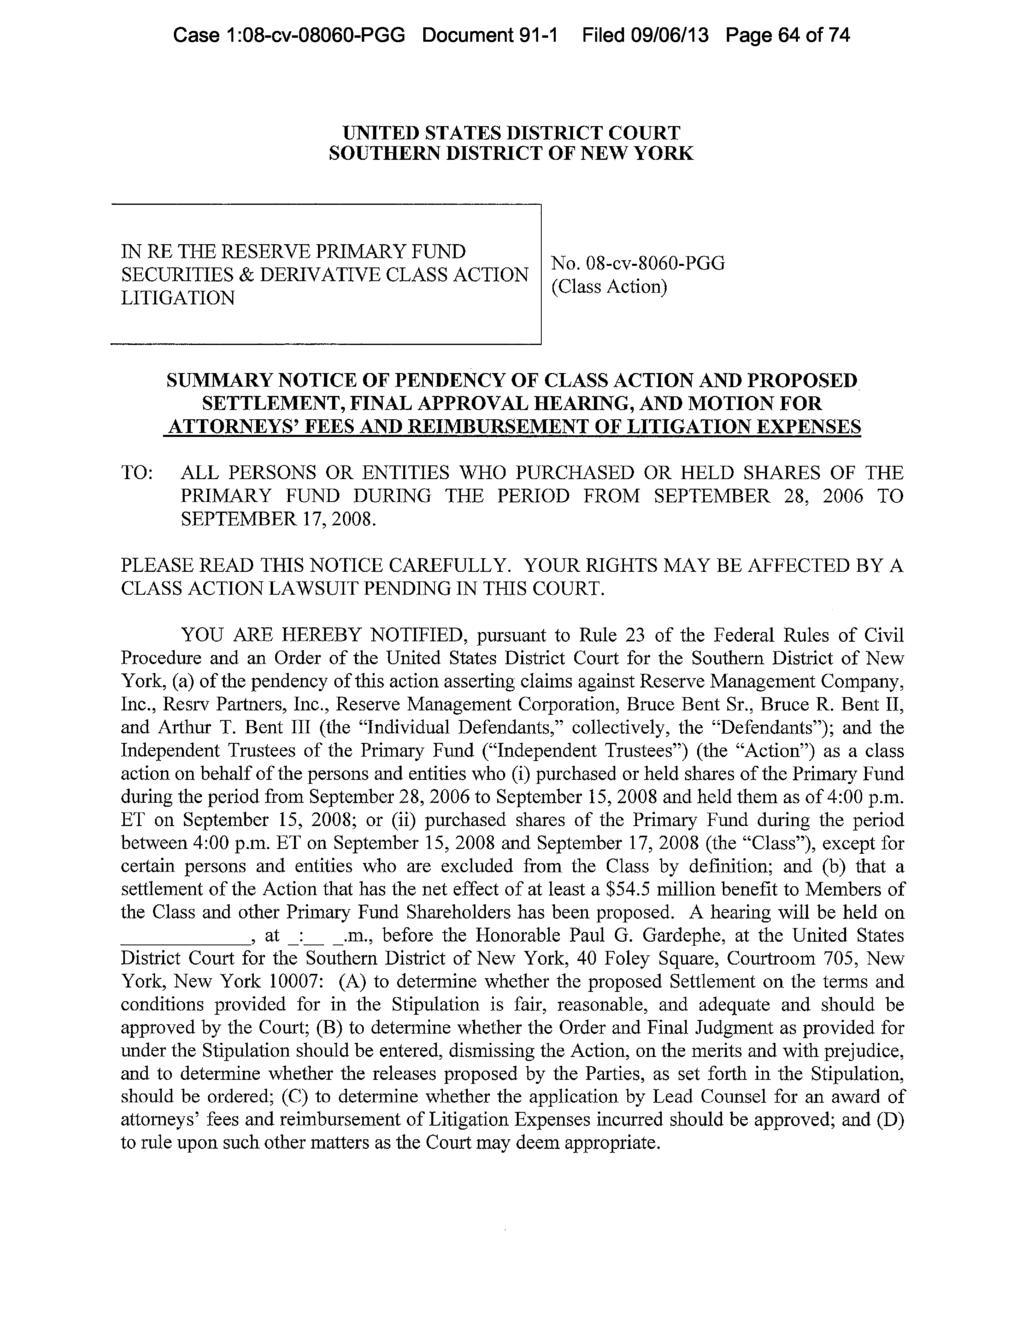 Case 1:08-cv-08060-PGG Document 91-1 Filed 09/06/13 Page 64 of 74 UNITED STATES DISTRICT COURT SOUTHERN DISTRICT OF NEW YORK IN RE THE RESERVE PRIMARY FUND SECURITIES & DERIVATIVE CLASS ACTION